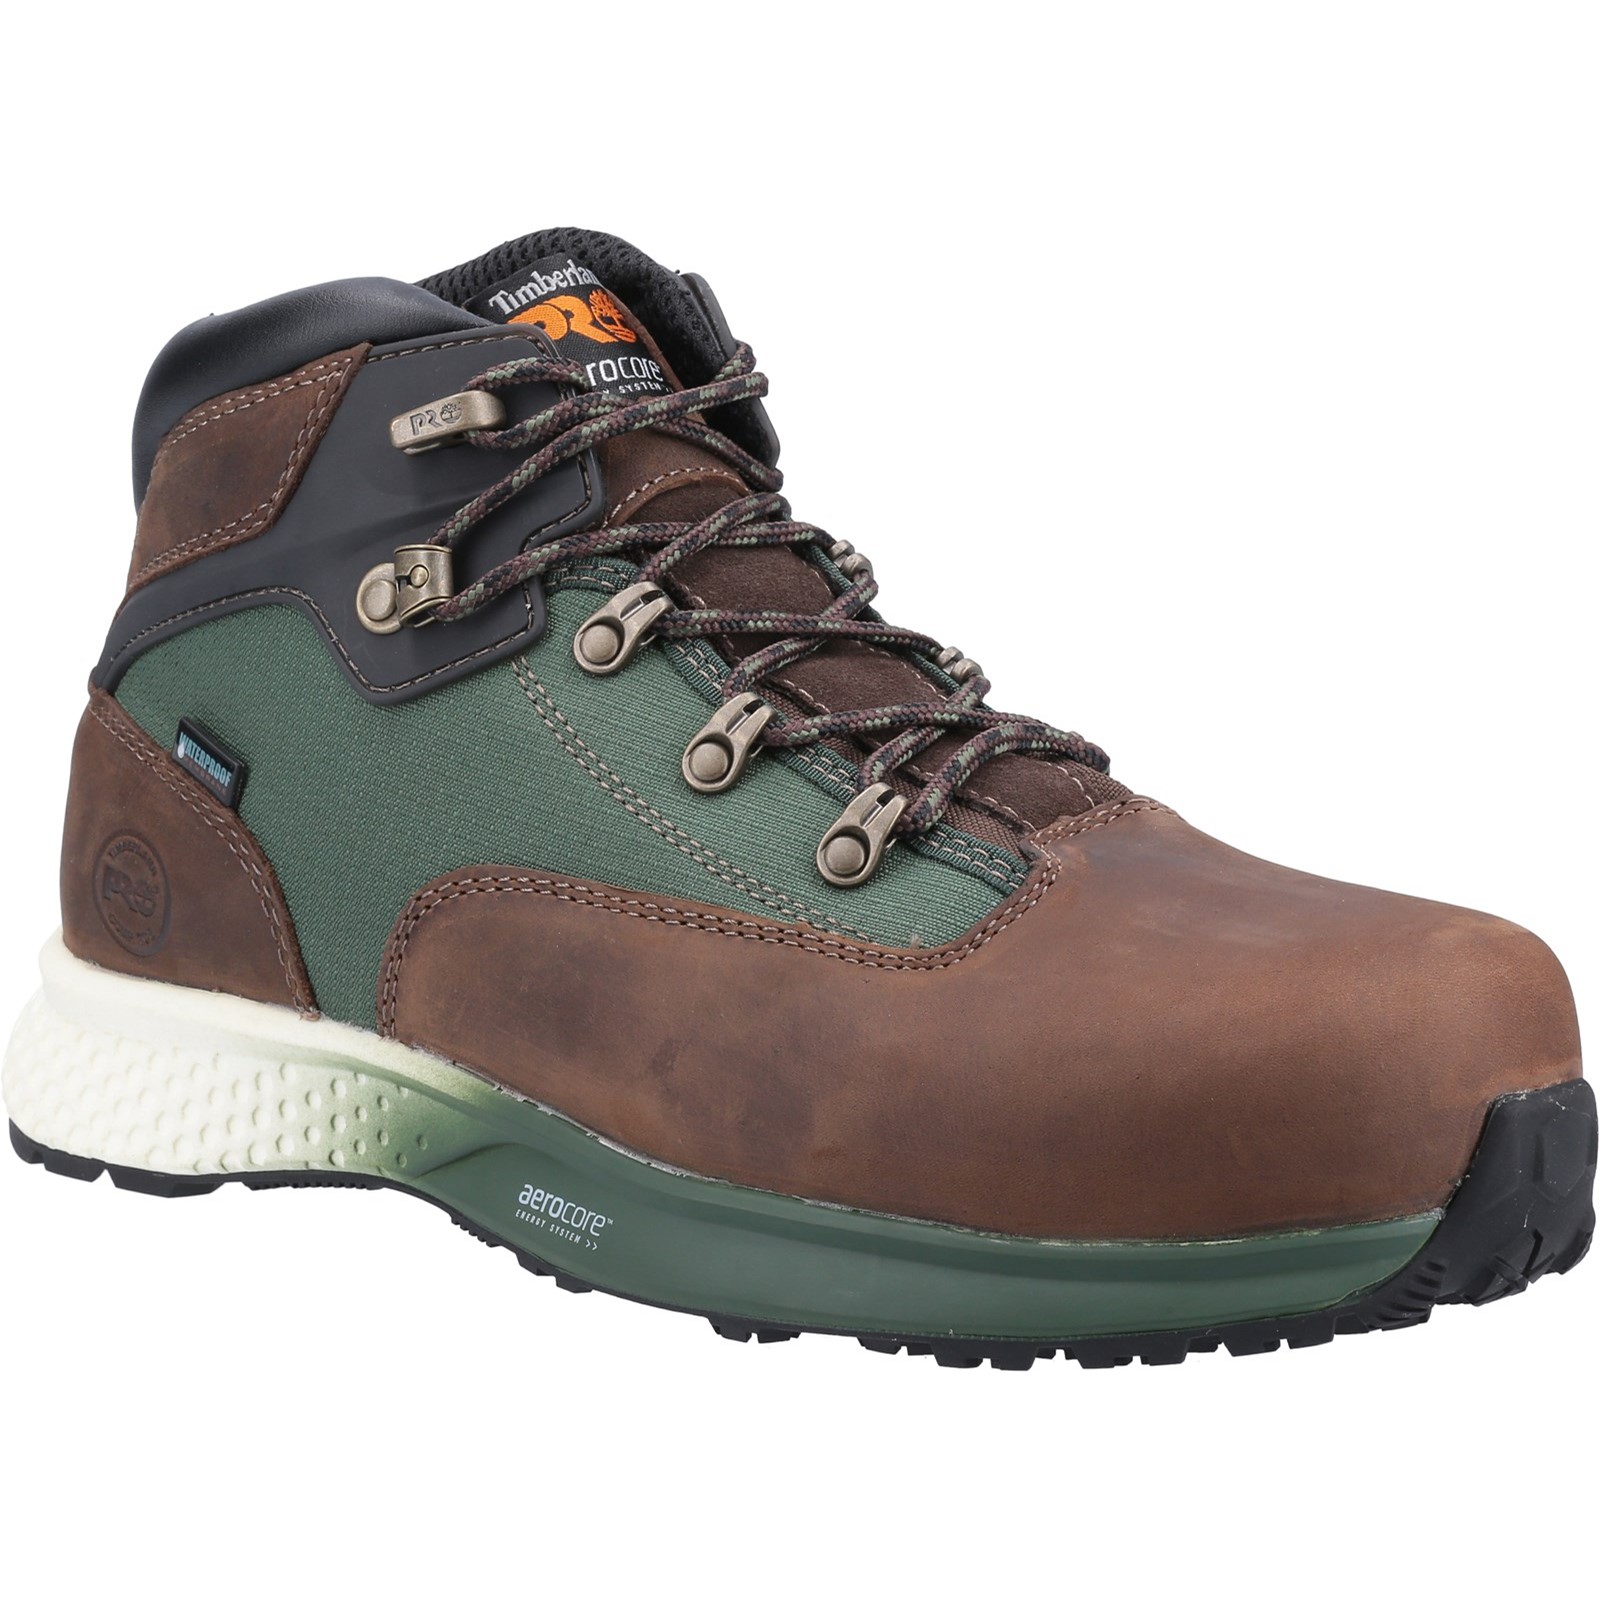 Euro Hiker Composite Safety Boot Brown/Green